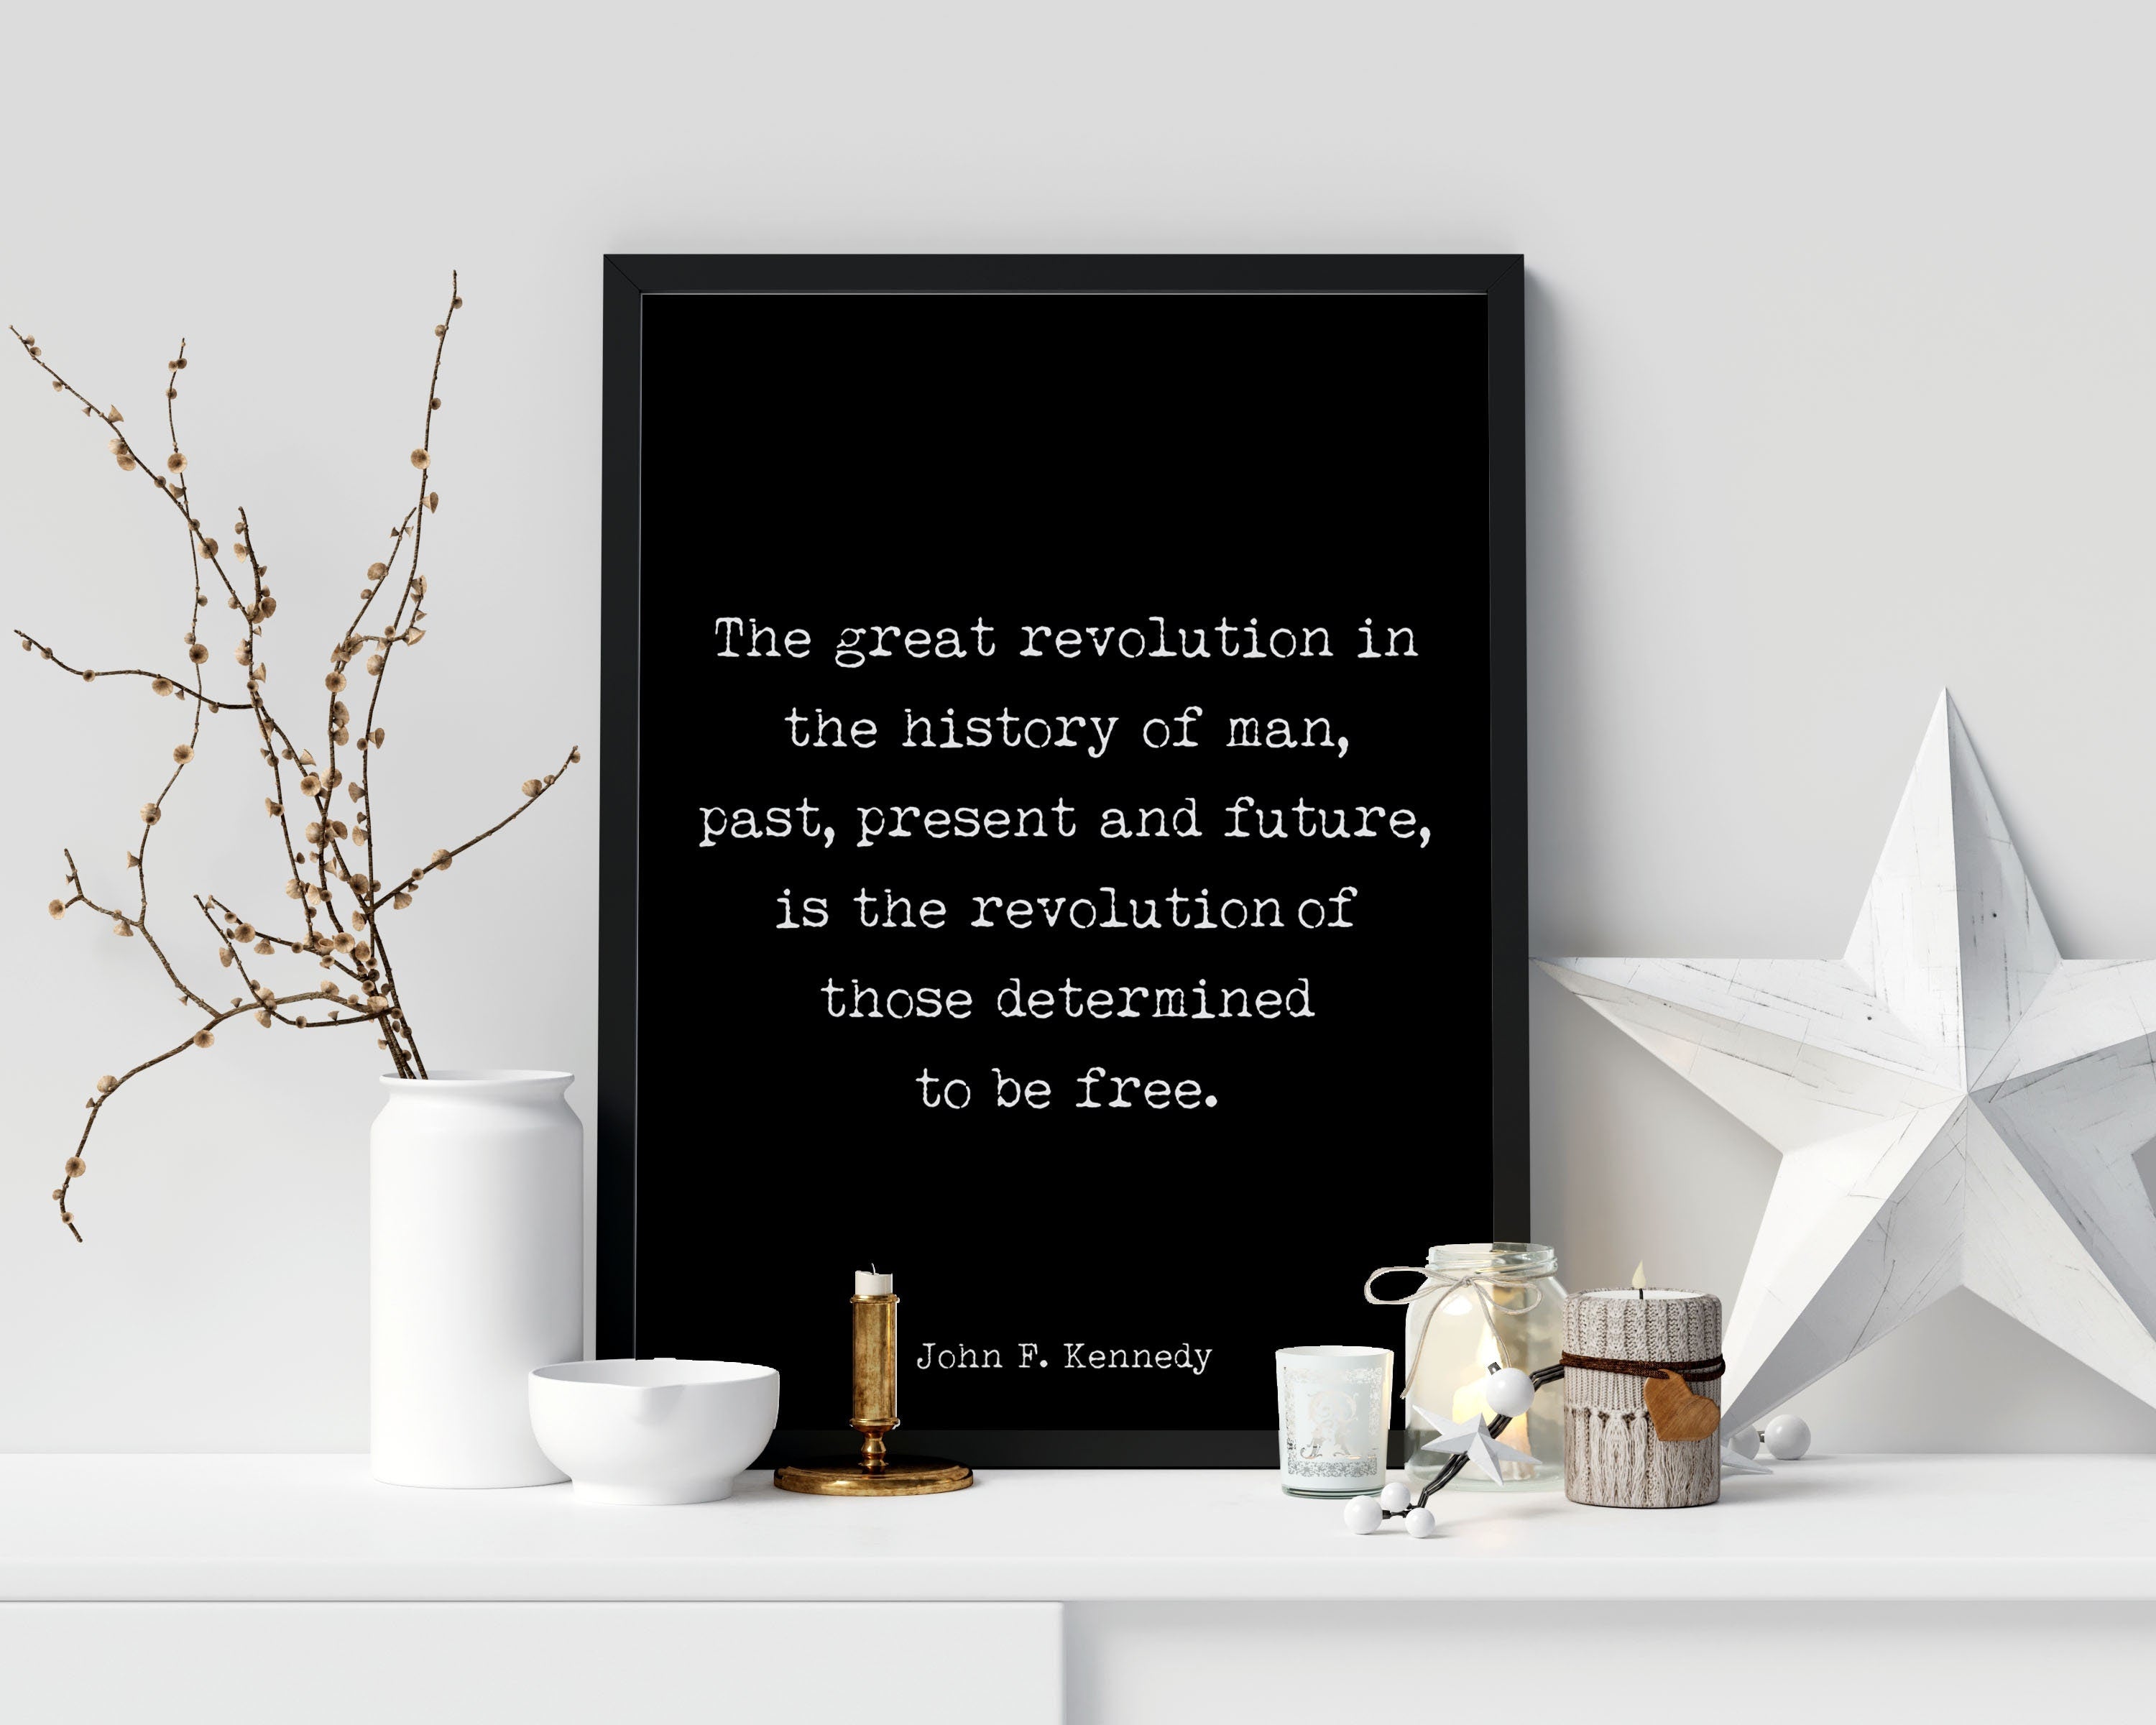 John F. Kennedy Quote Print, Those Determined to be Free